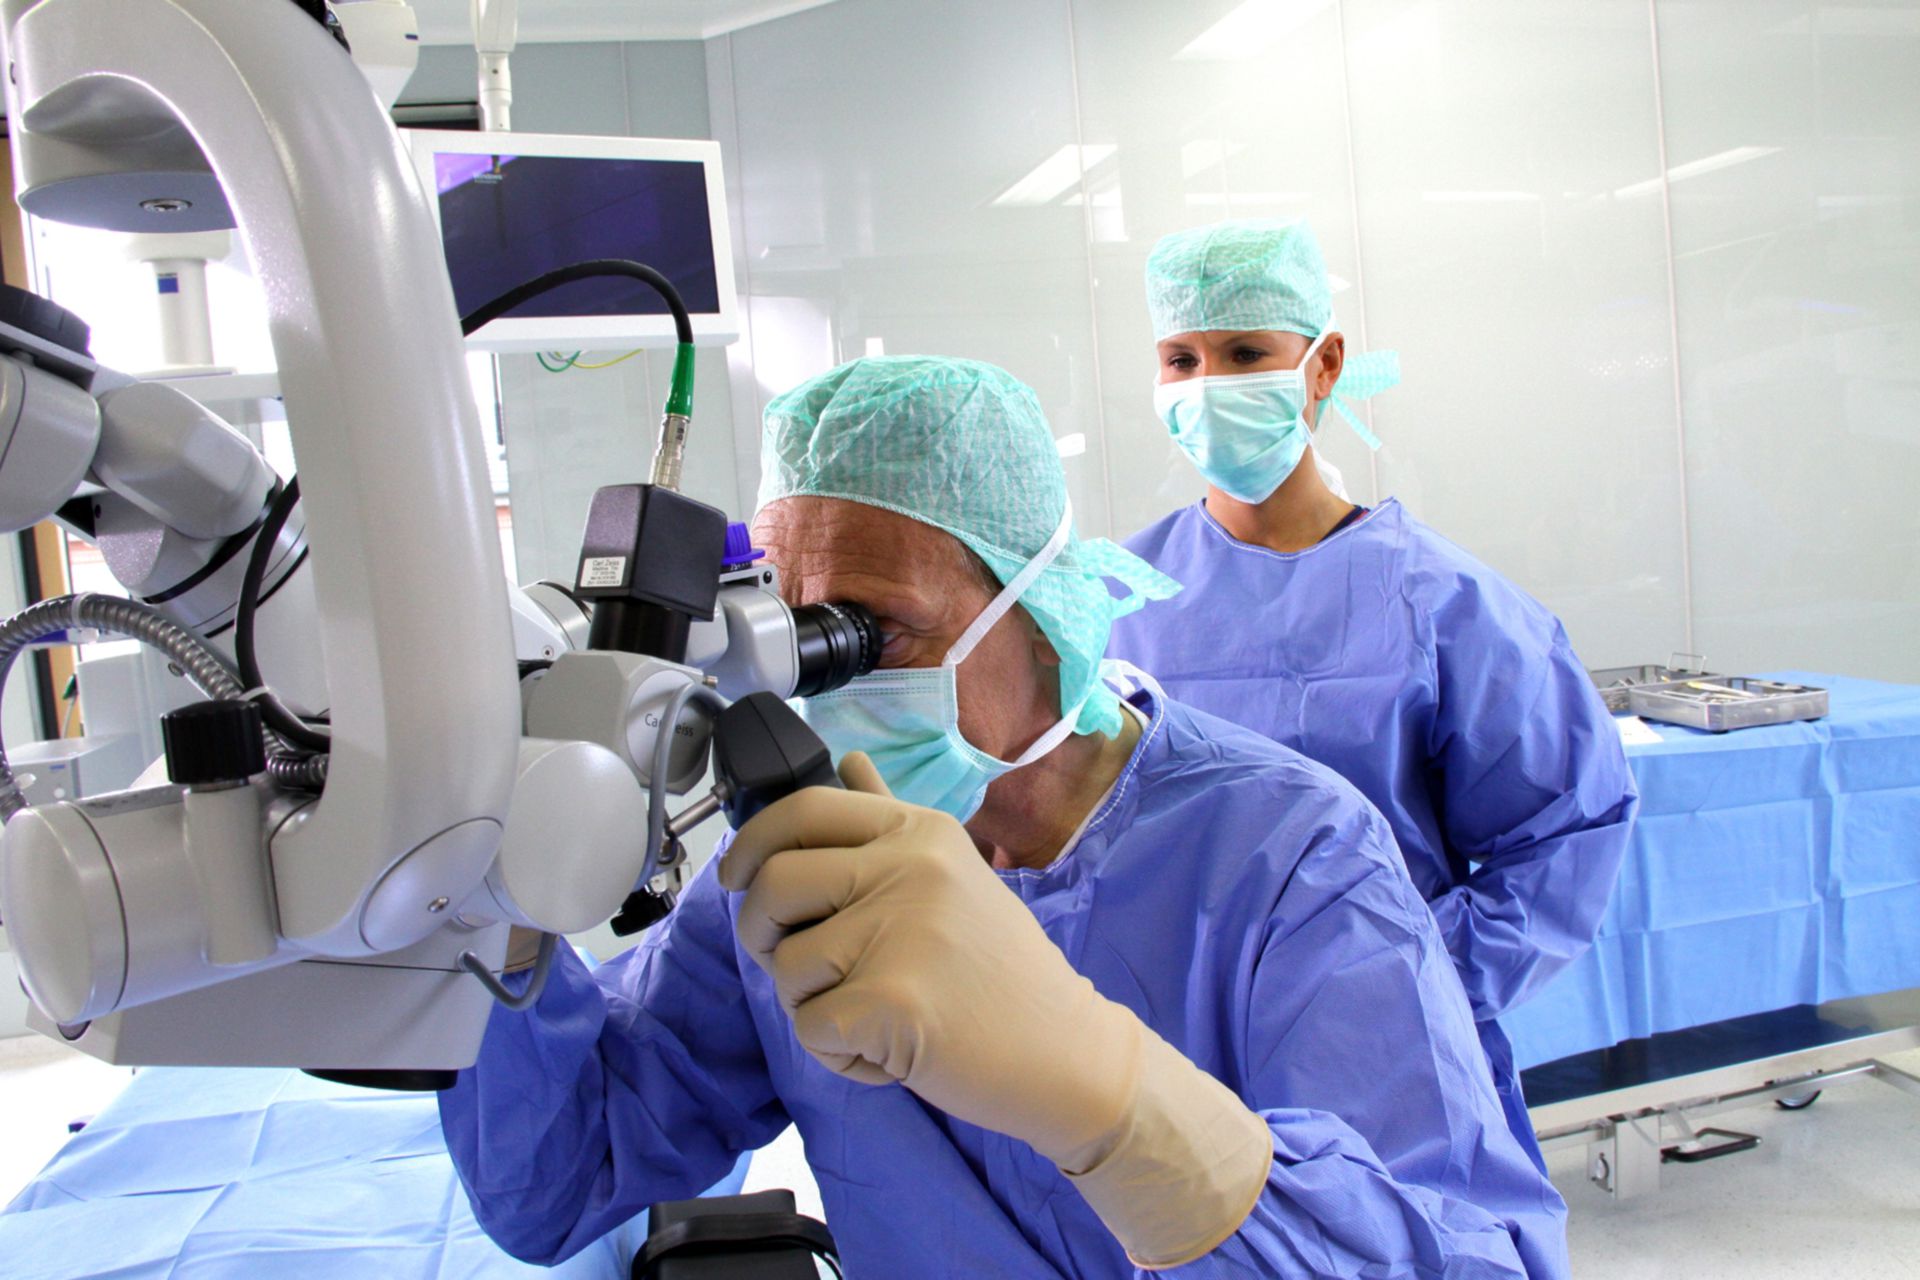 Prof. Germann at work in the OR